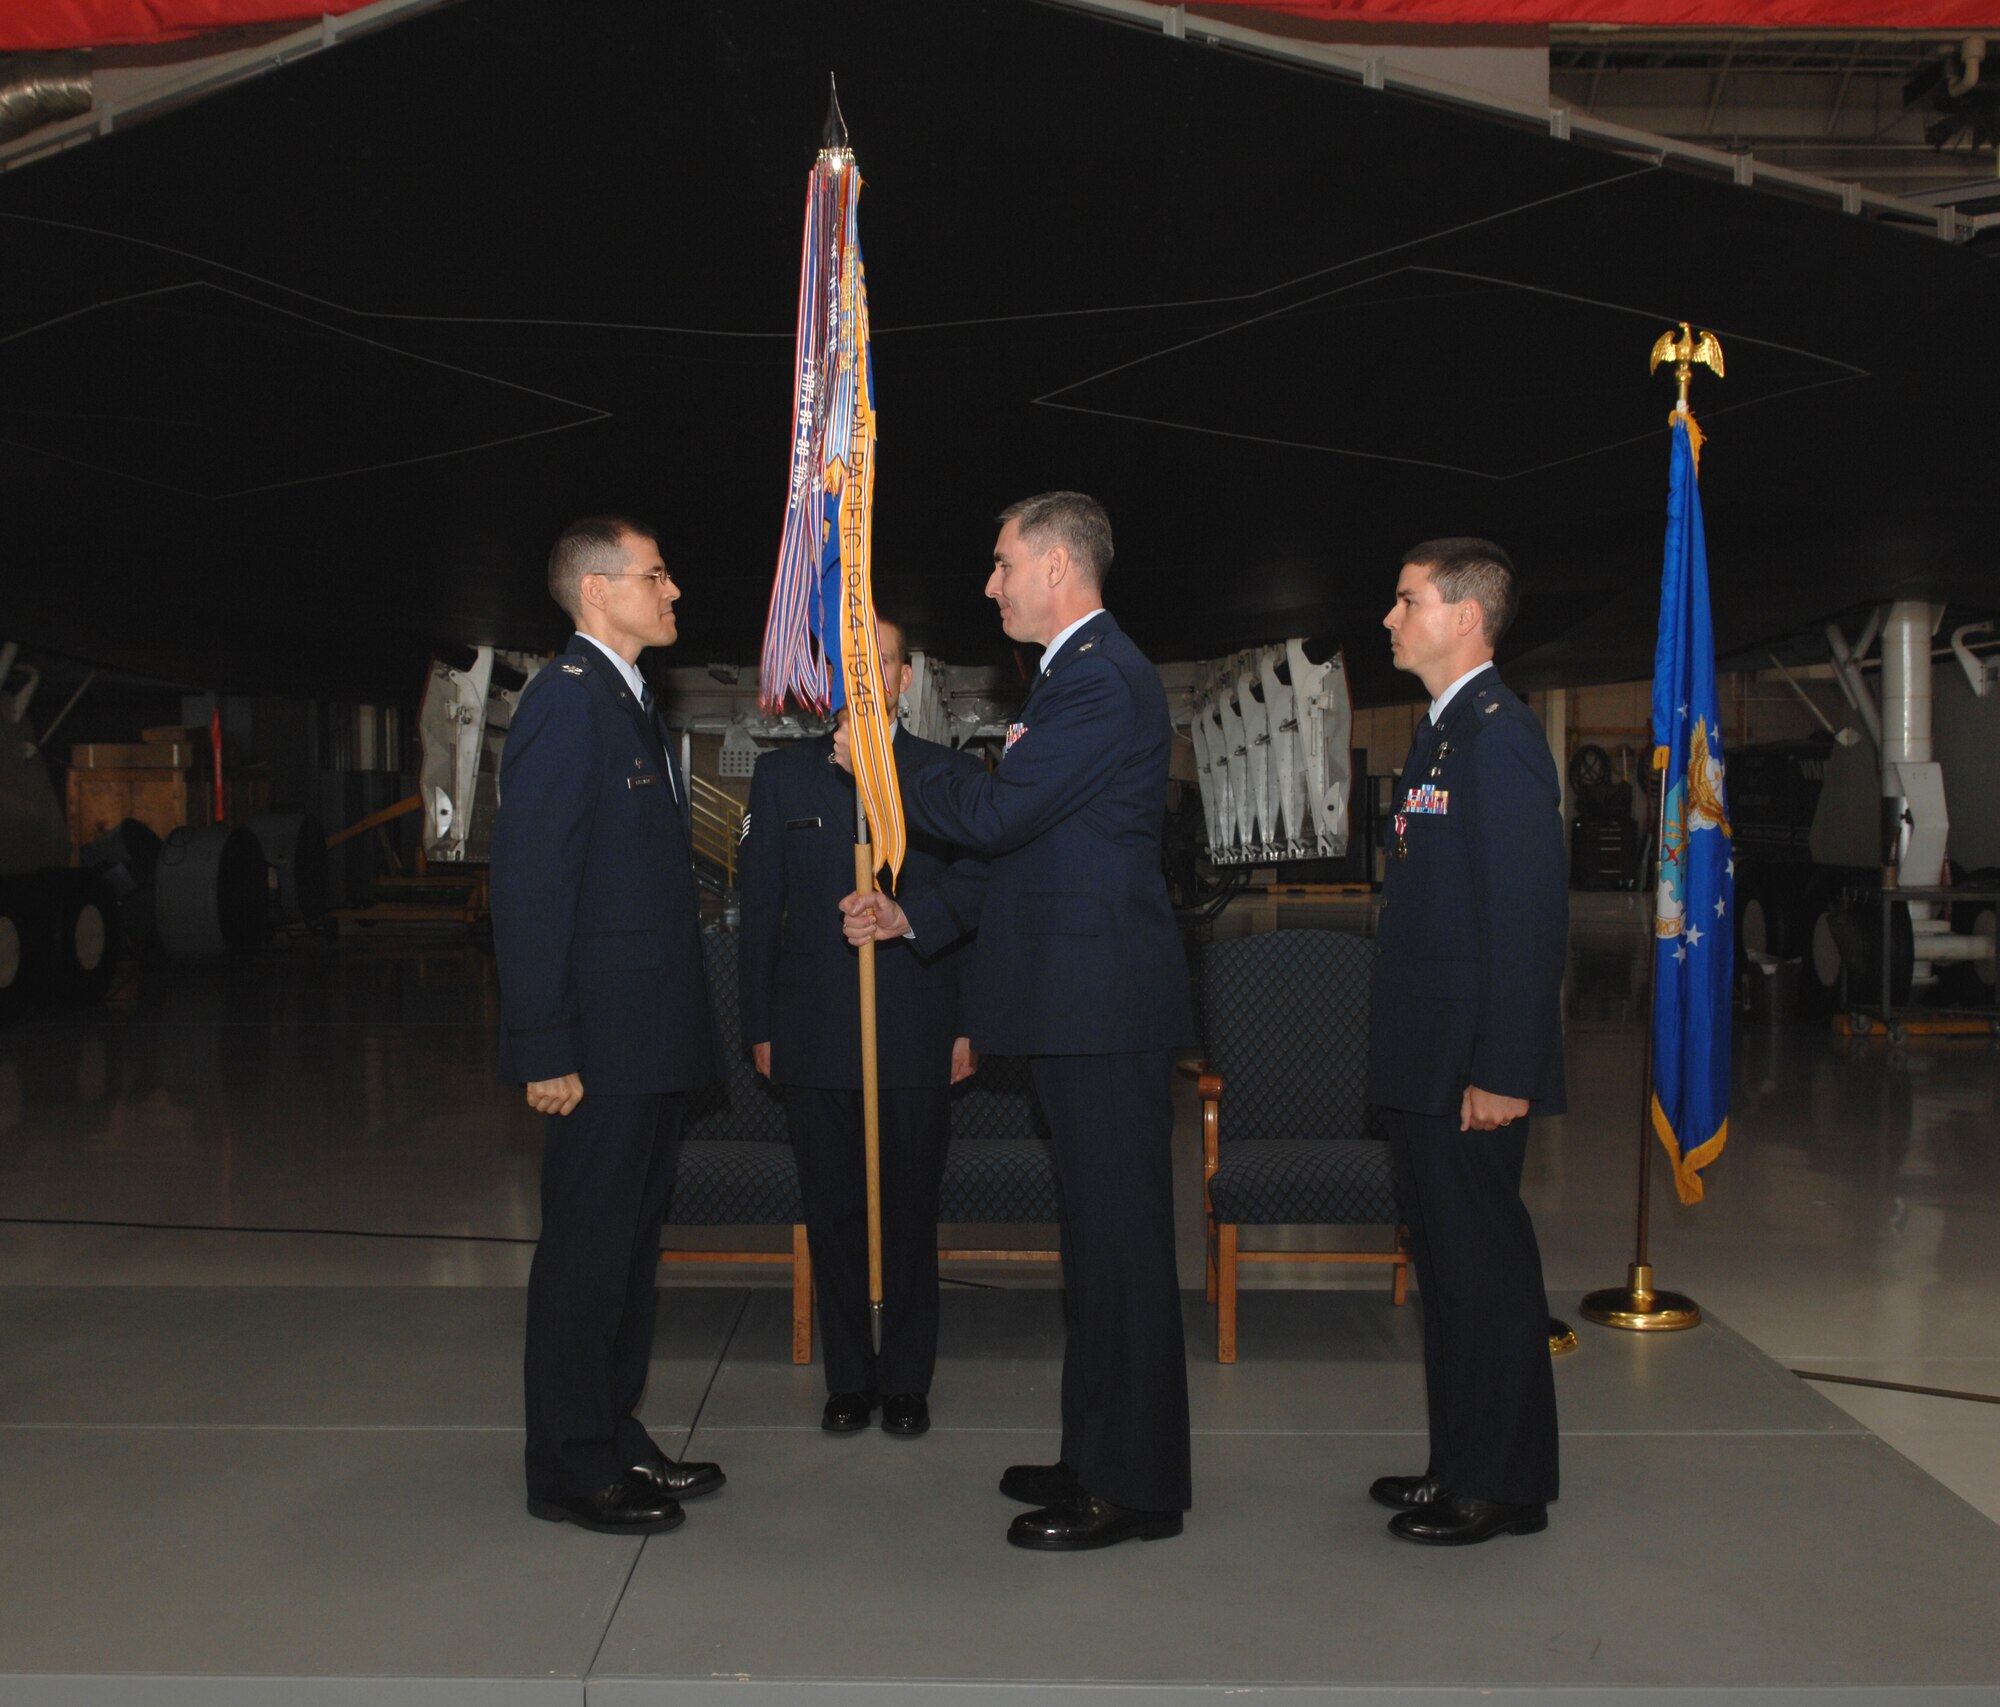 WHITEMAN AIR FORCE BASE, Mo. – (Center) Col. John Vitacca, 393d Bomb Squadron commander, receives the guidon of the 393d BS from Col. Thomas Bussiere (left), 509th Operations Group commander, during a change-of-command ceremony Oct. 3. Colonel Vitacca, who was previously assigned to the 509th Operations Support Squadron here, replaces Col. Paul Tibbets (right), who moves on to Brussels, Belgium, where he will be the Chief of the Nuclear, Biological and Chemical Policy Branch at NATO Headquarters. (U.S. Air Force photo/Airman 1st Class Stephanie Clark)